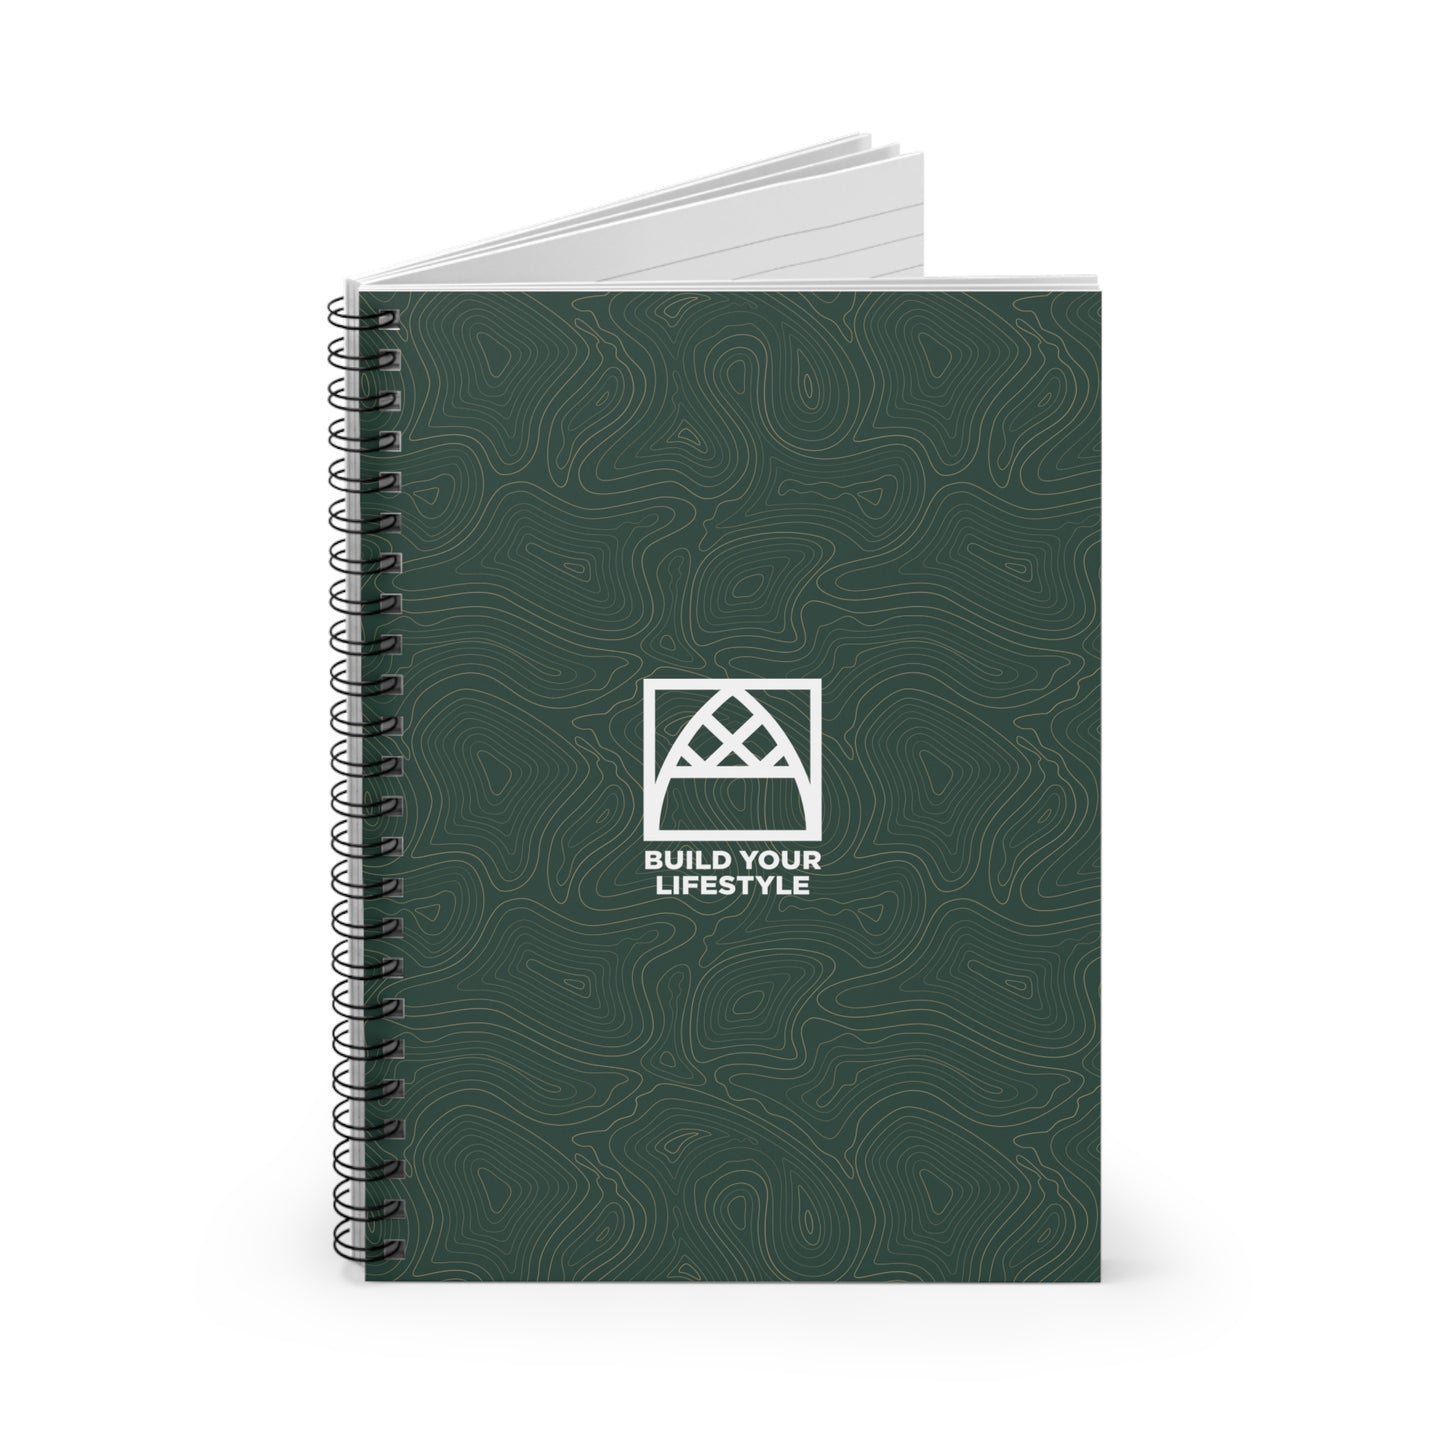 Arched Cabins LLC " Build Your Lifestyle" Spiral Notebook - Ruled Line